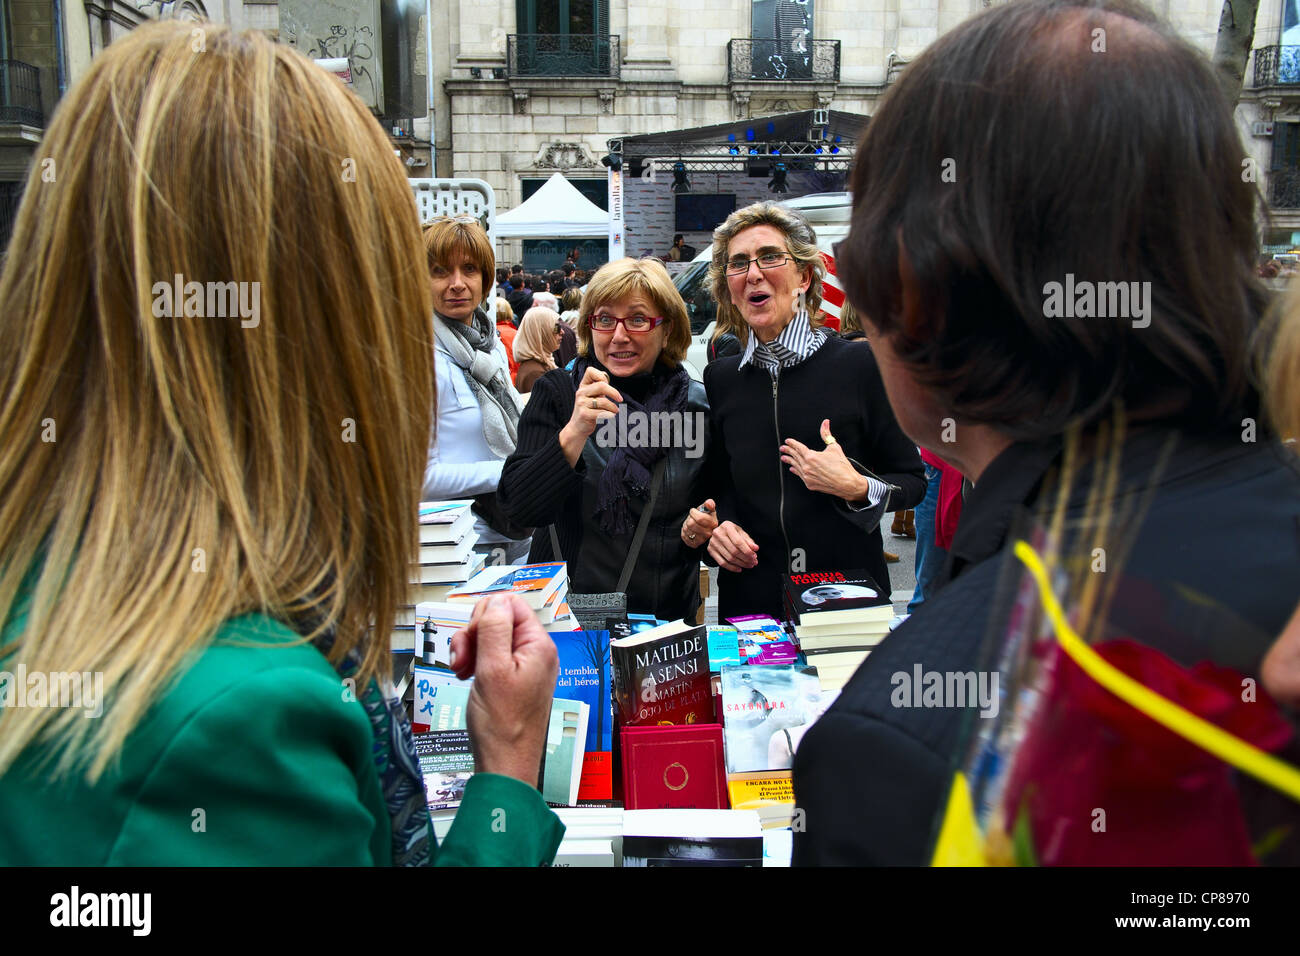 Book stall, vendors and shoppers on La Rambla in Barcelona on St. George Day, 2012. Stock Photo